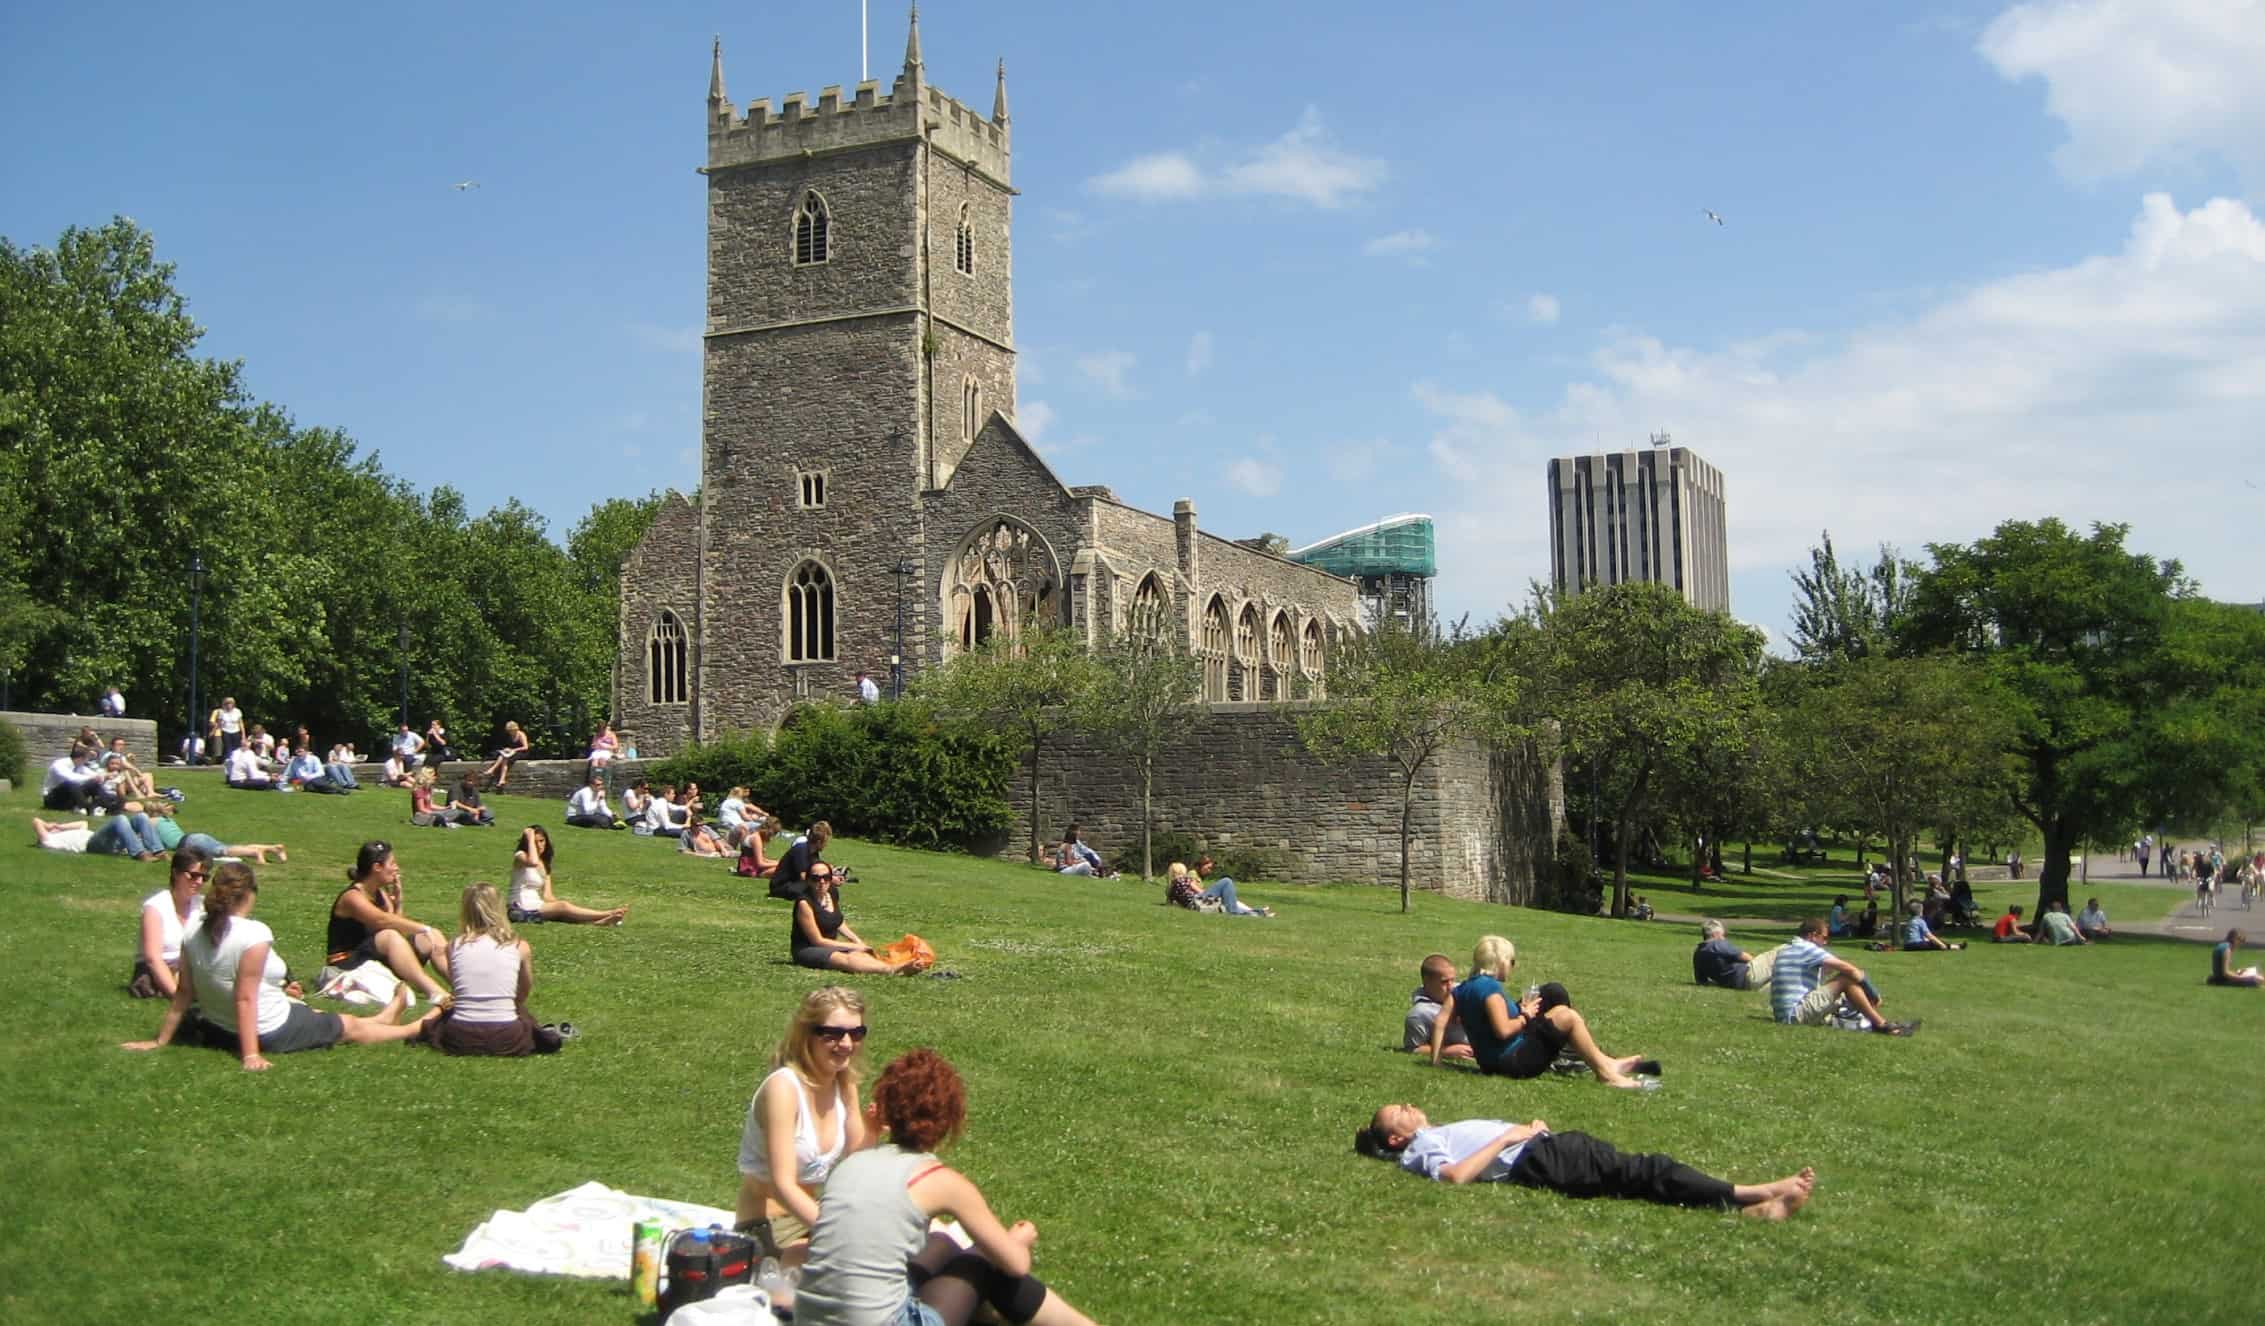 People lounging and picnicking on an expansive lawn in front of St Peter's Church in Bristol, UK